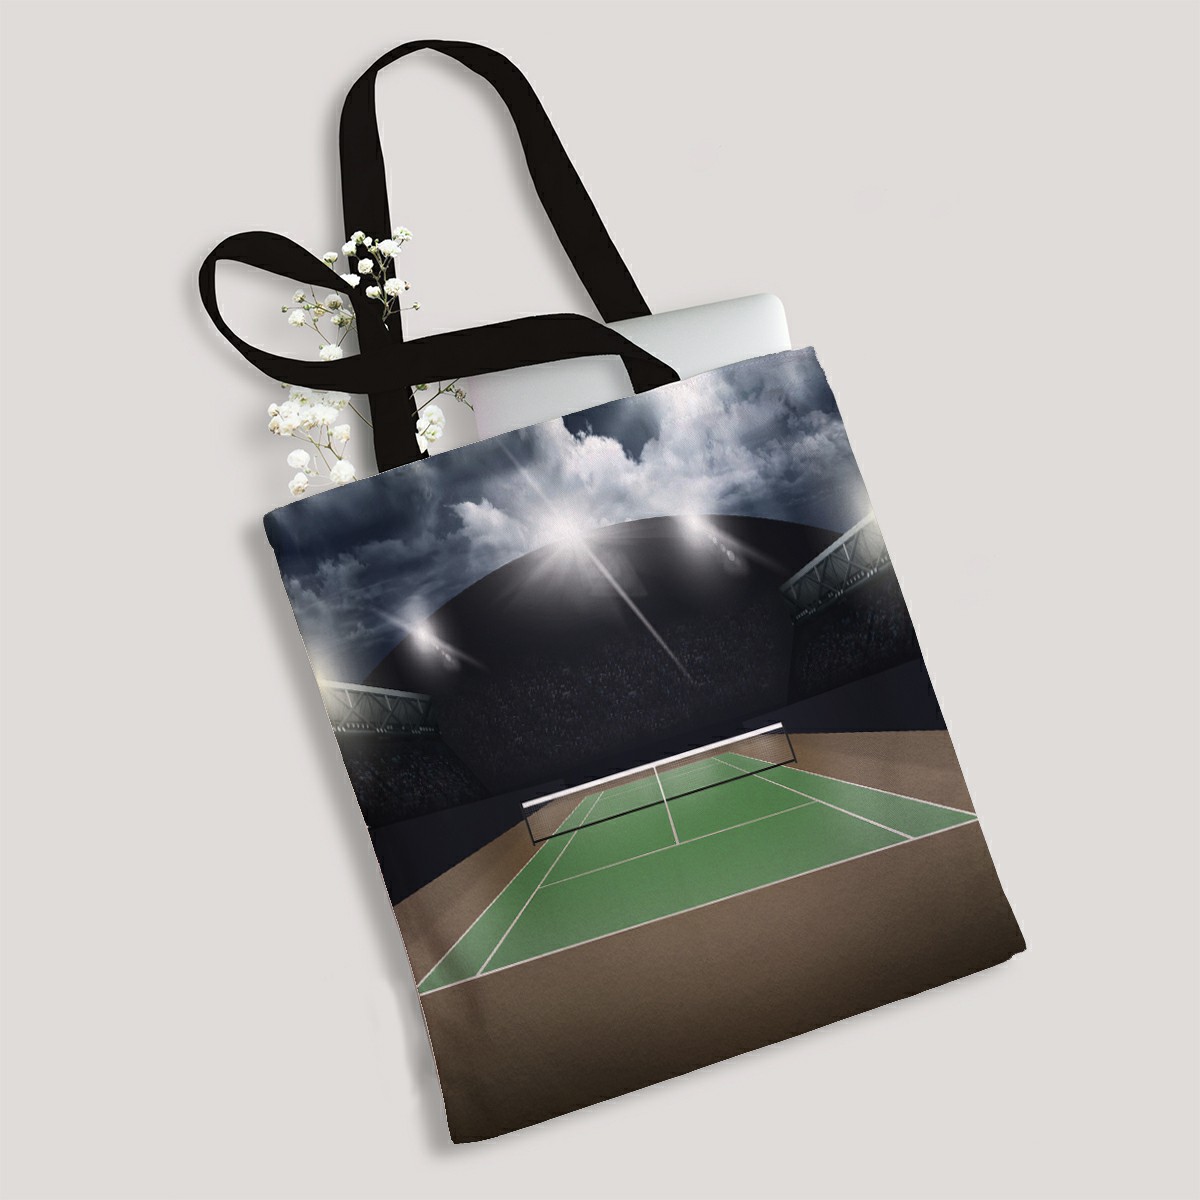 ECZJNT Tennis Court Canvas Bag Reusable Tote Grocery Shopping Bags Tote Bag 14"(W) x 16"(H) - image 1 of 1